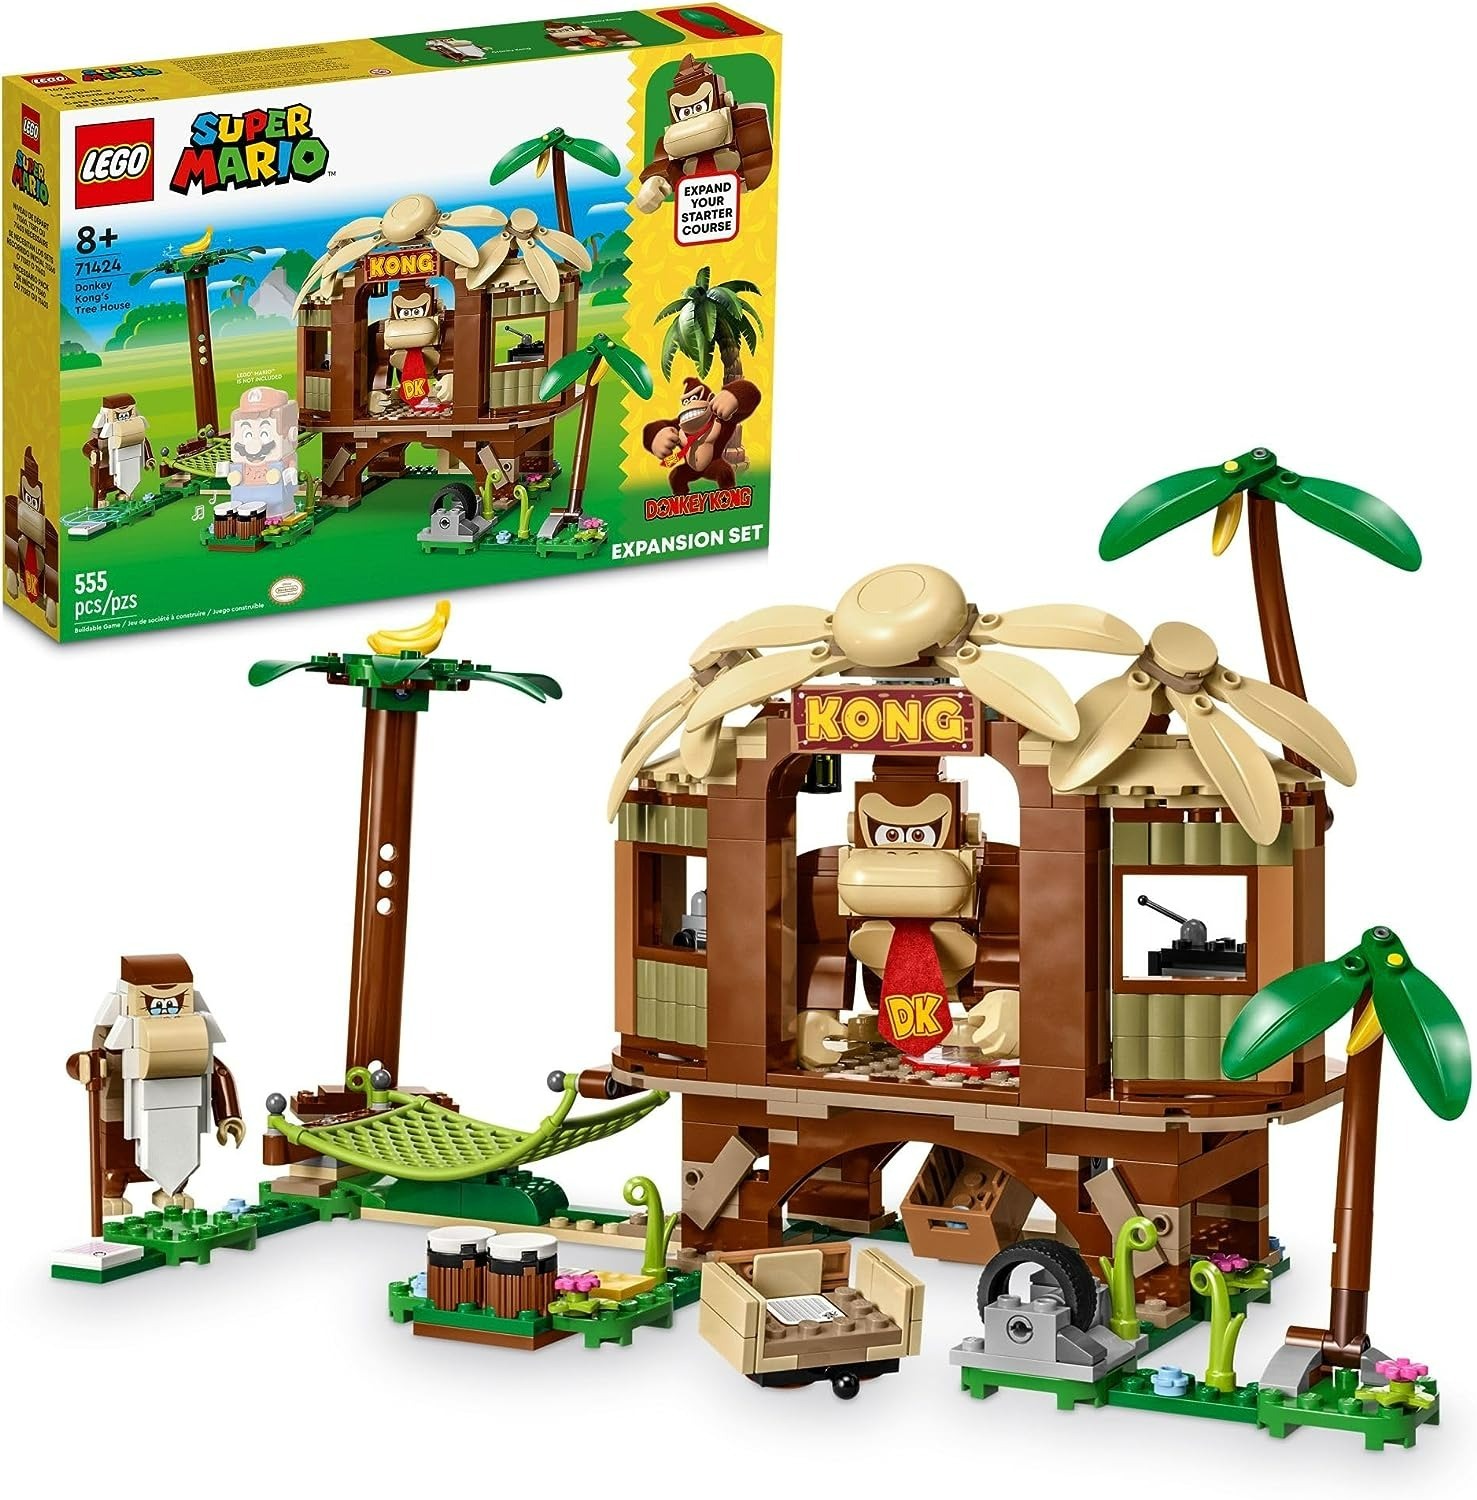 The New Donkey Kong And Sonic Lego Sets Are On Sale At  - GameSpot